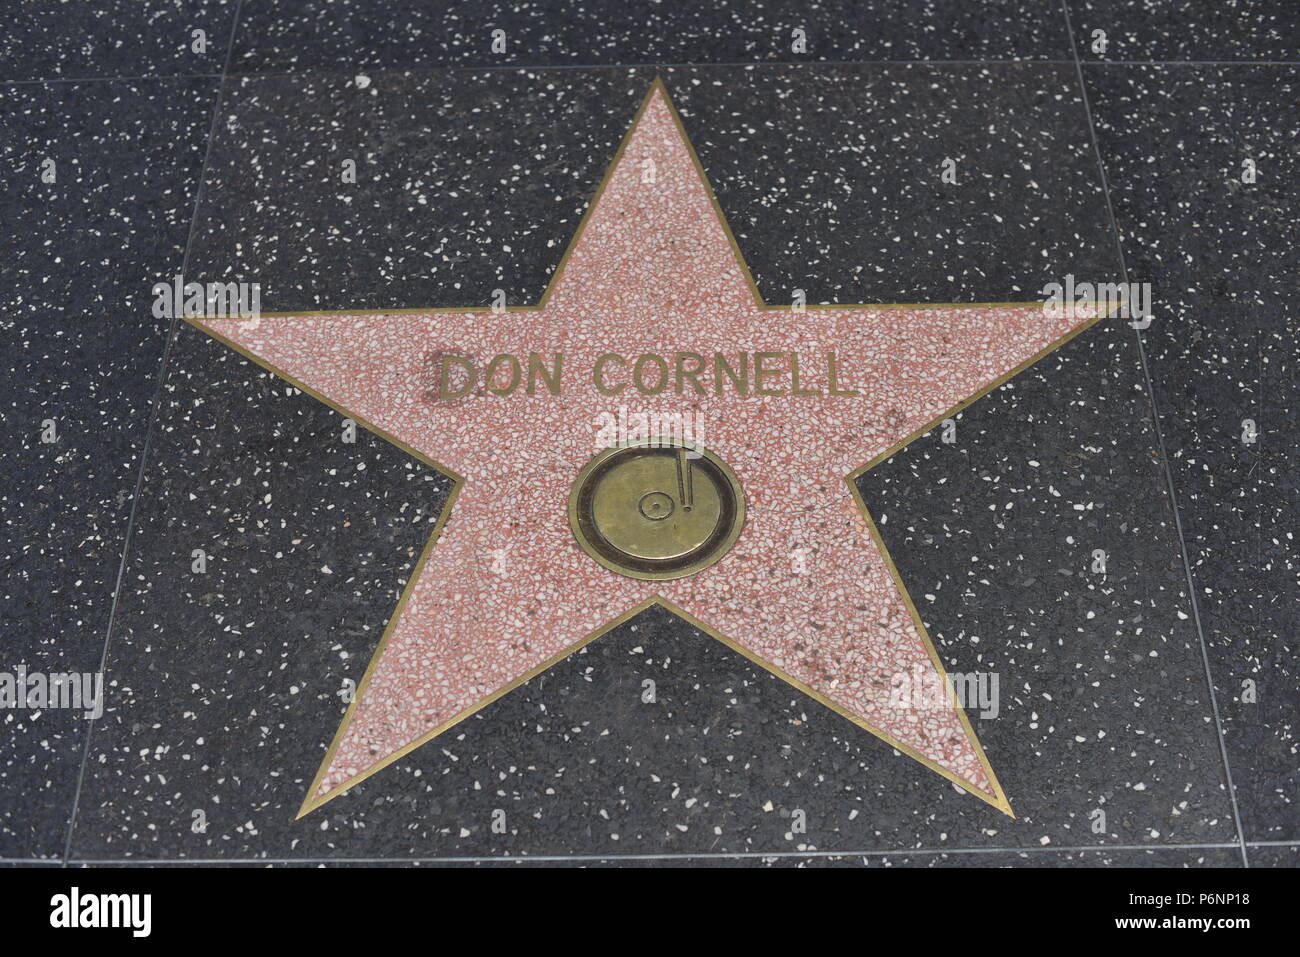 HOLLYWOOD, CA - June 29: Don Cornell star on the Hollywood Walk of Fame in Hollywood, California on June 29, 2018. Stock Photo